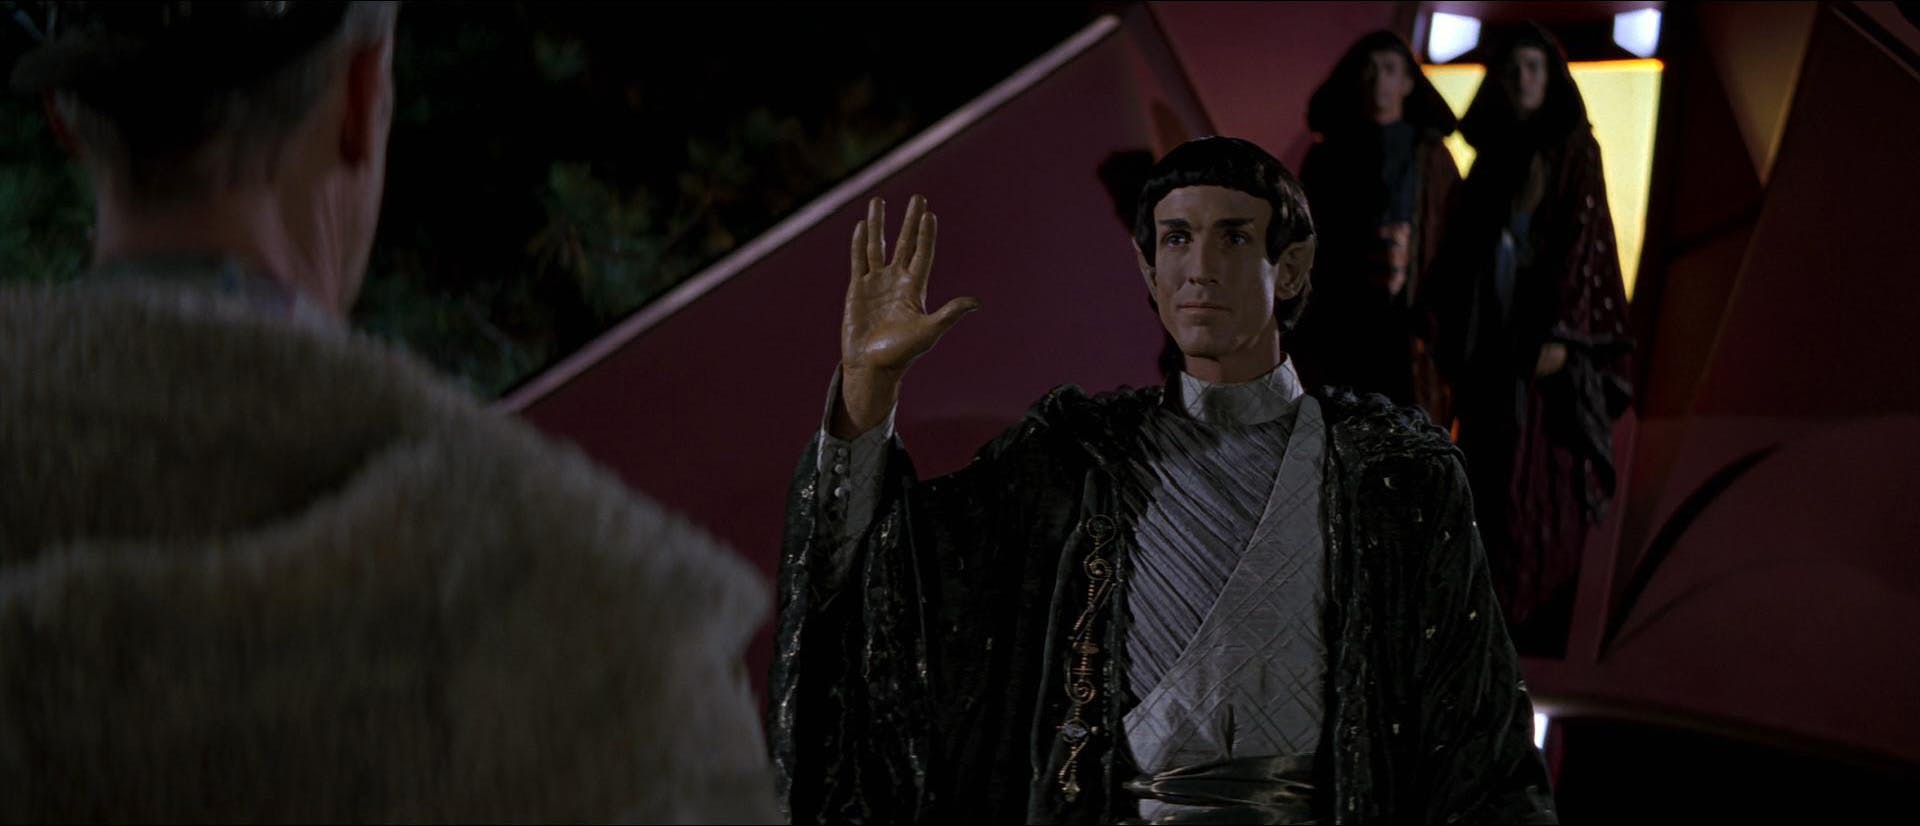 Vulcans arrive on Bozeman on April 5, 2063, and offer a friendly greeting with the Vulcan salute as Zefram Cochrane welcomes them in Star Trek: First Contact